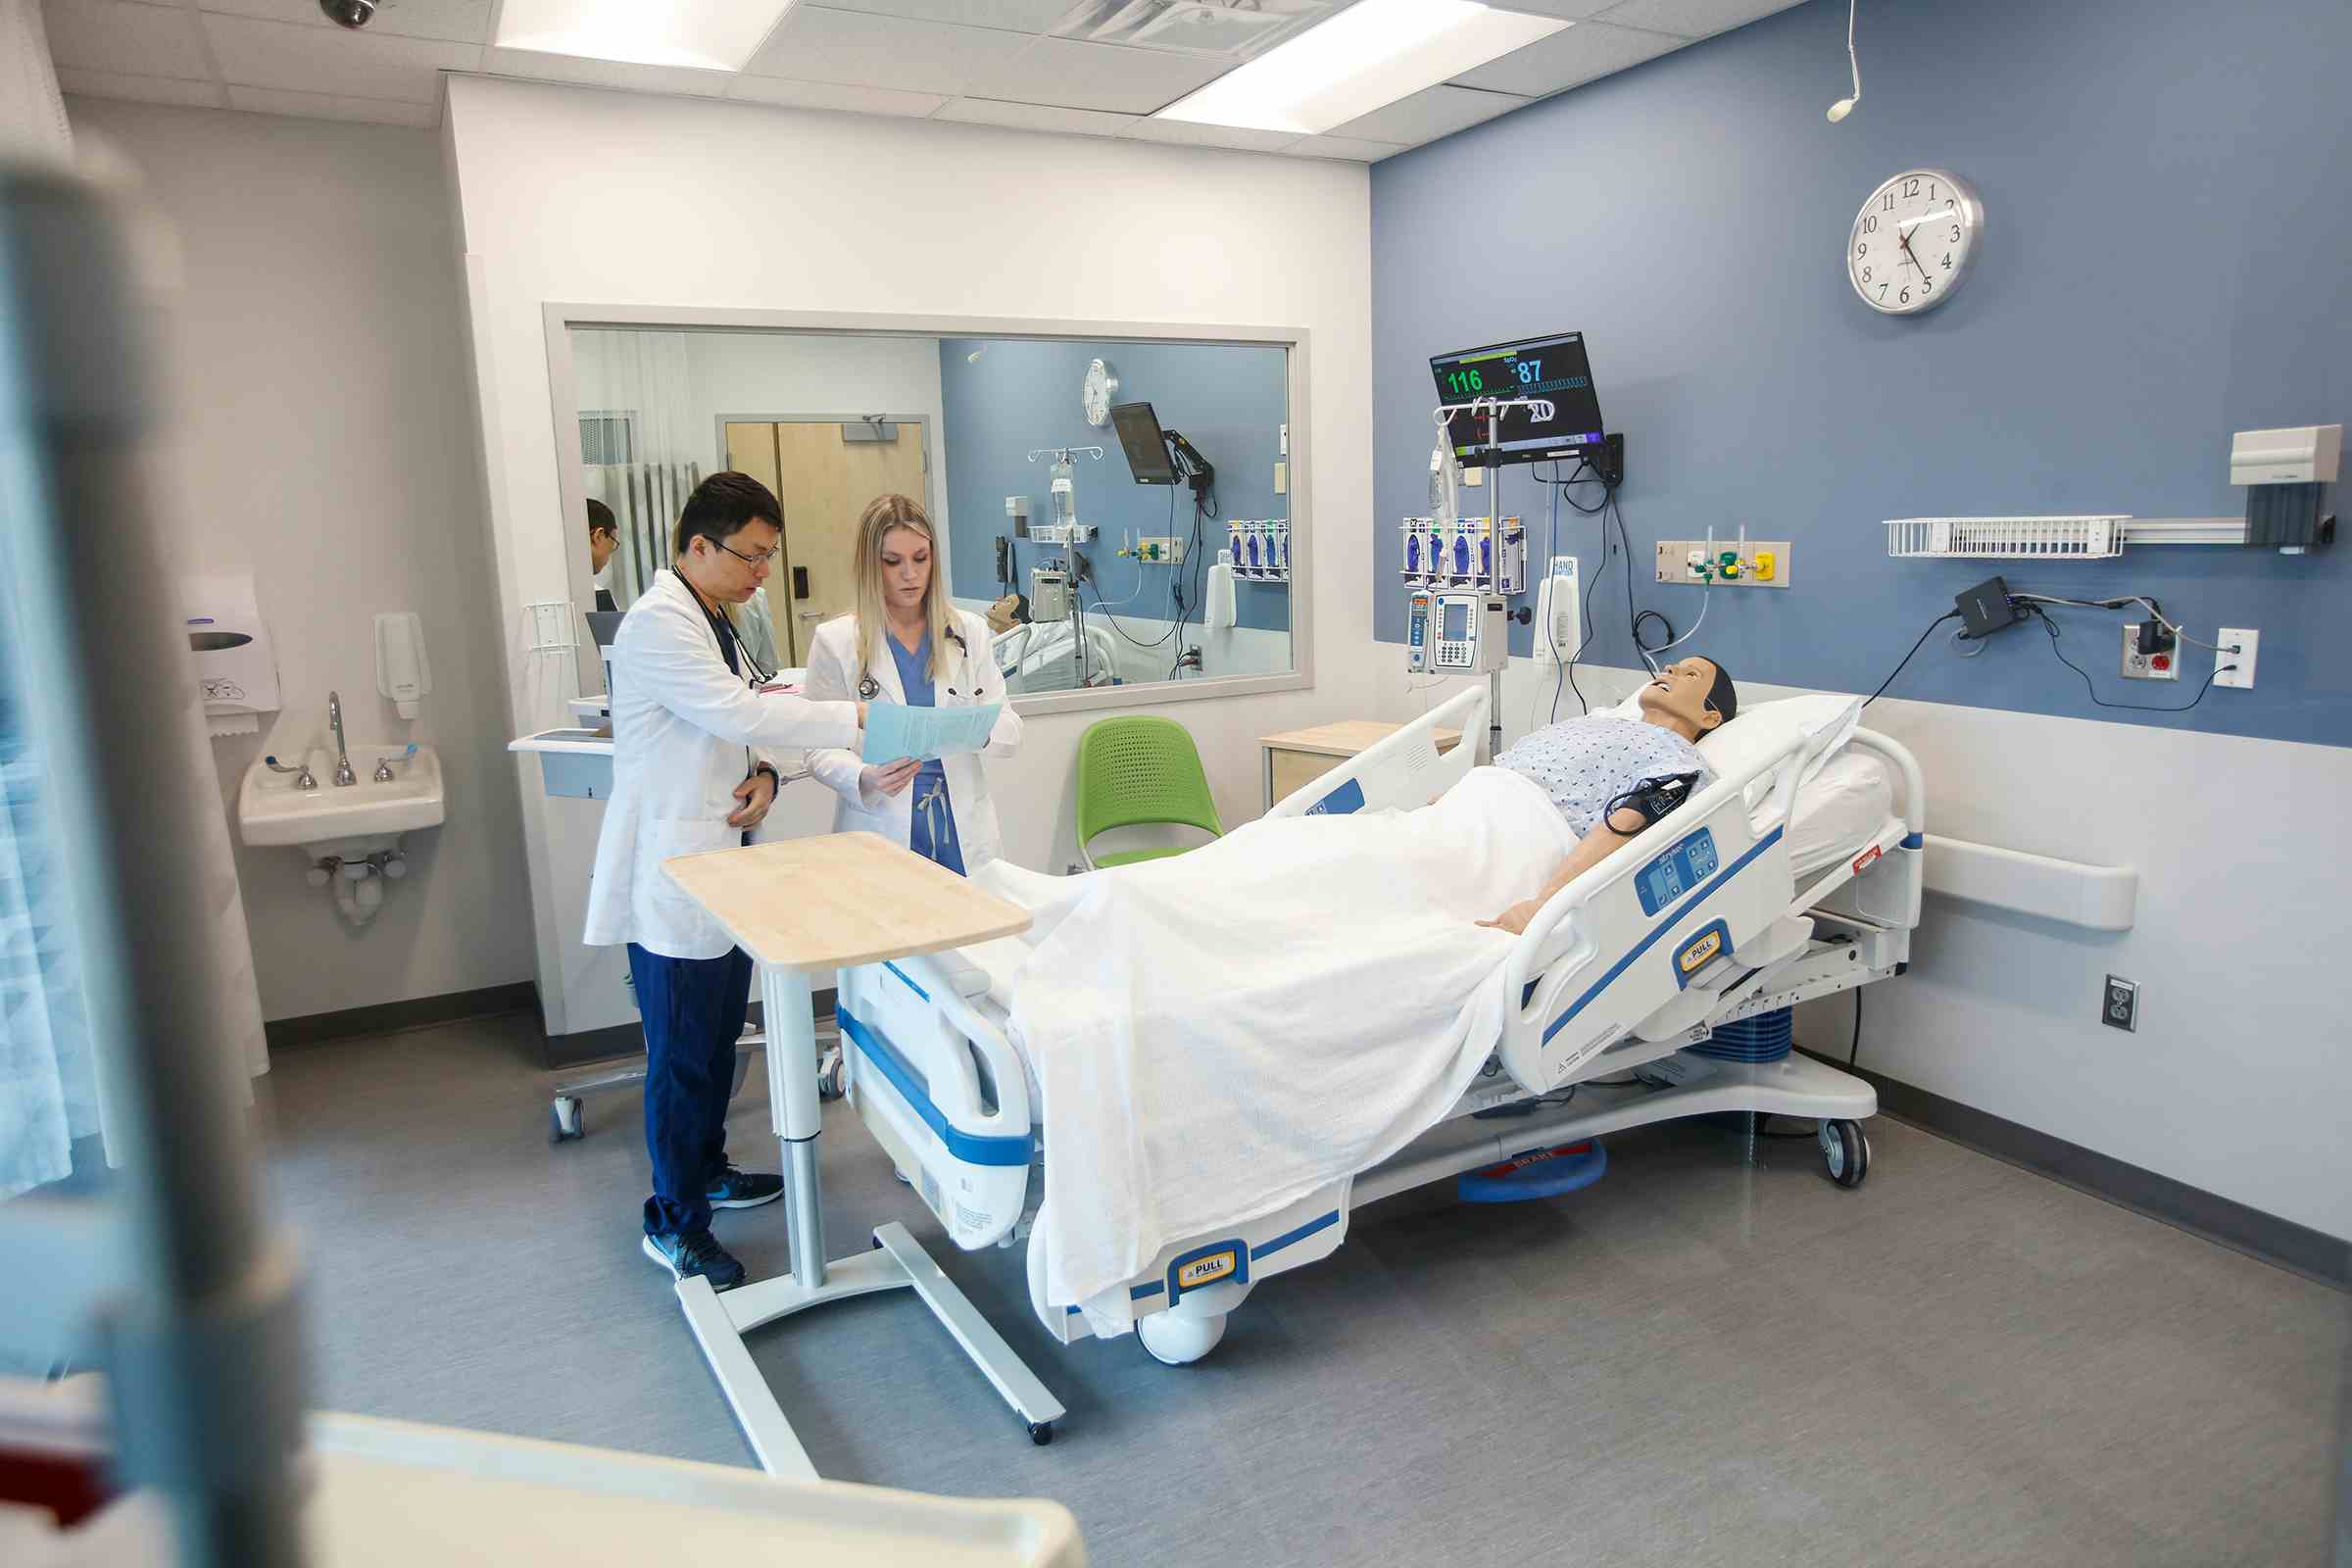 Two nursing students in the simulation room looking over a patient chart